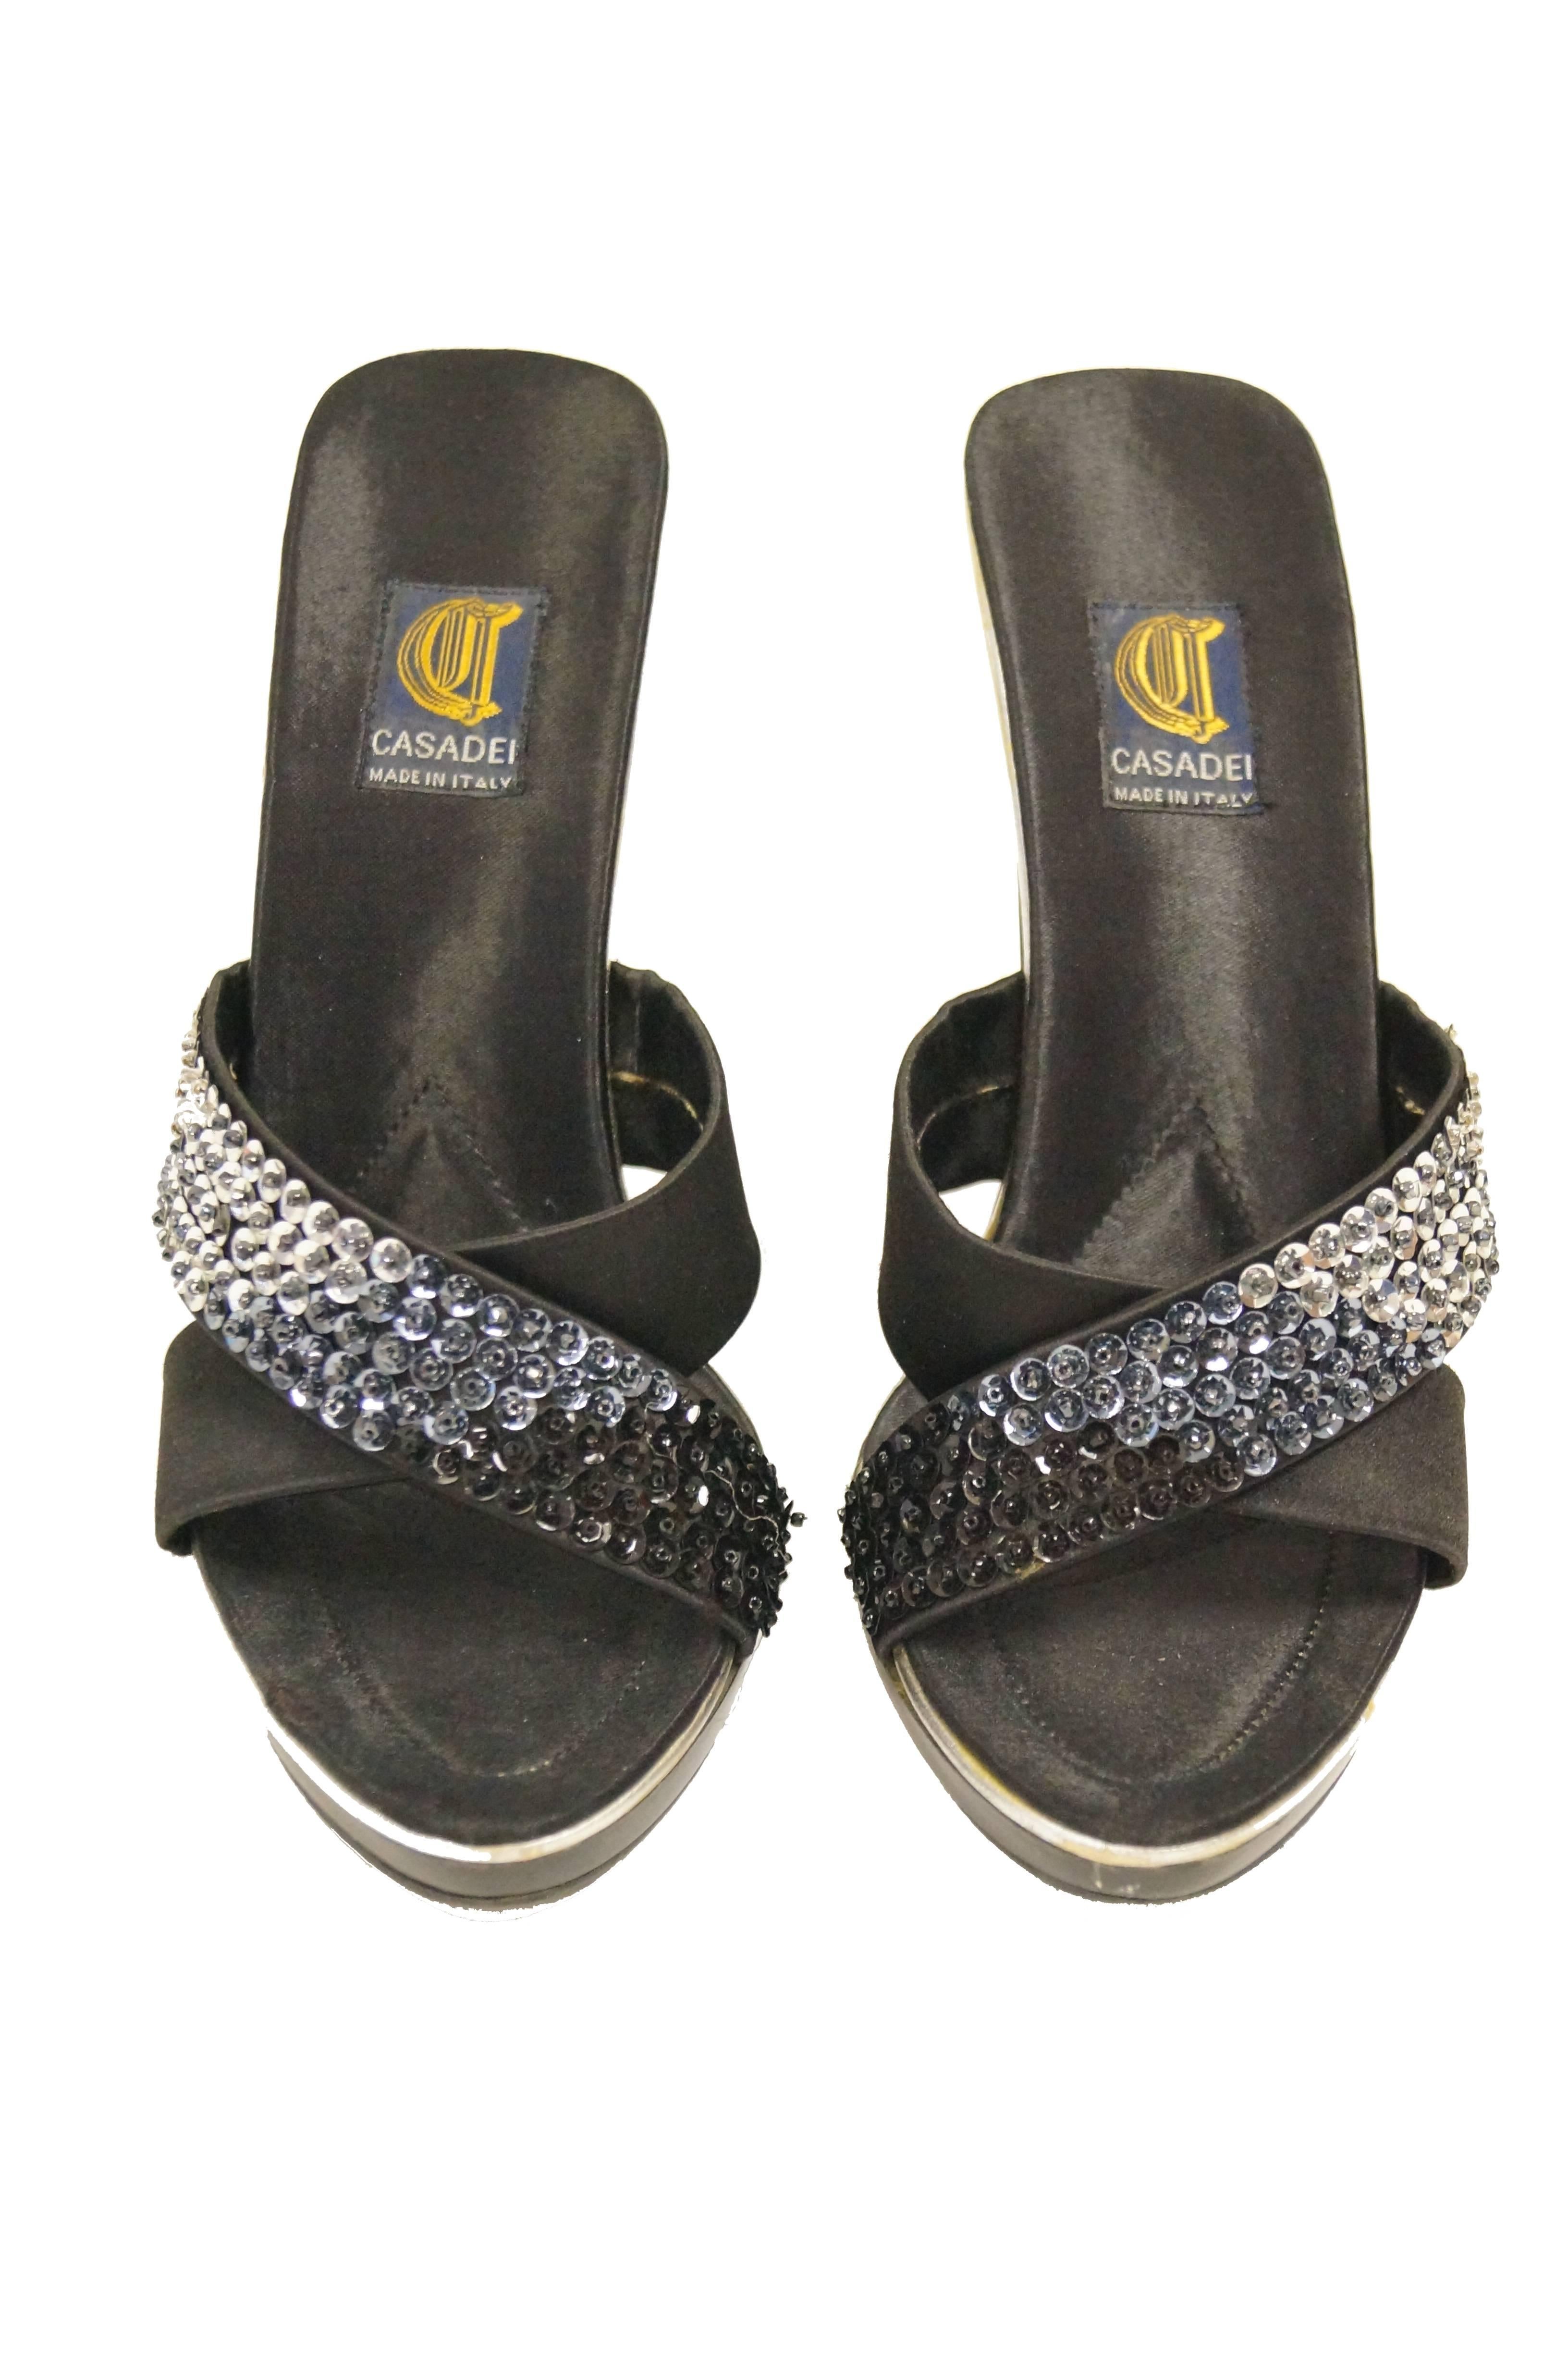 Criss-cross open back sandals by Casadei! The sandals feature two black - to silver ombre sequin satin straps that cross over to form an 